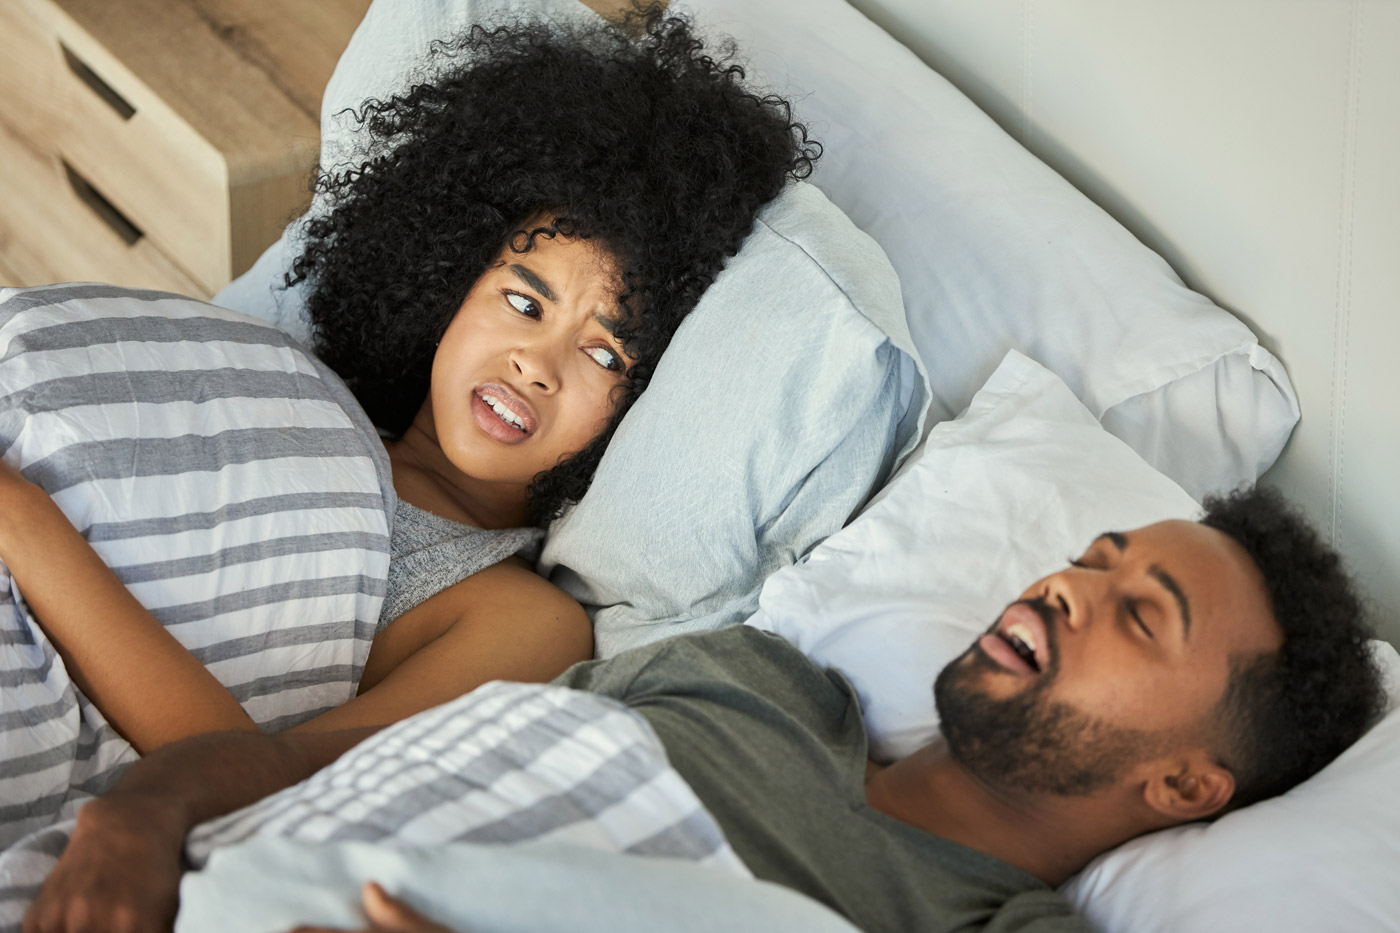 A woman lying in bed looks annoyed at her sleeping partner